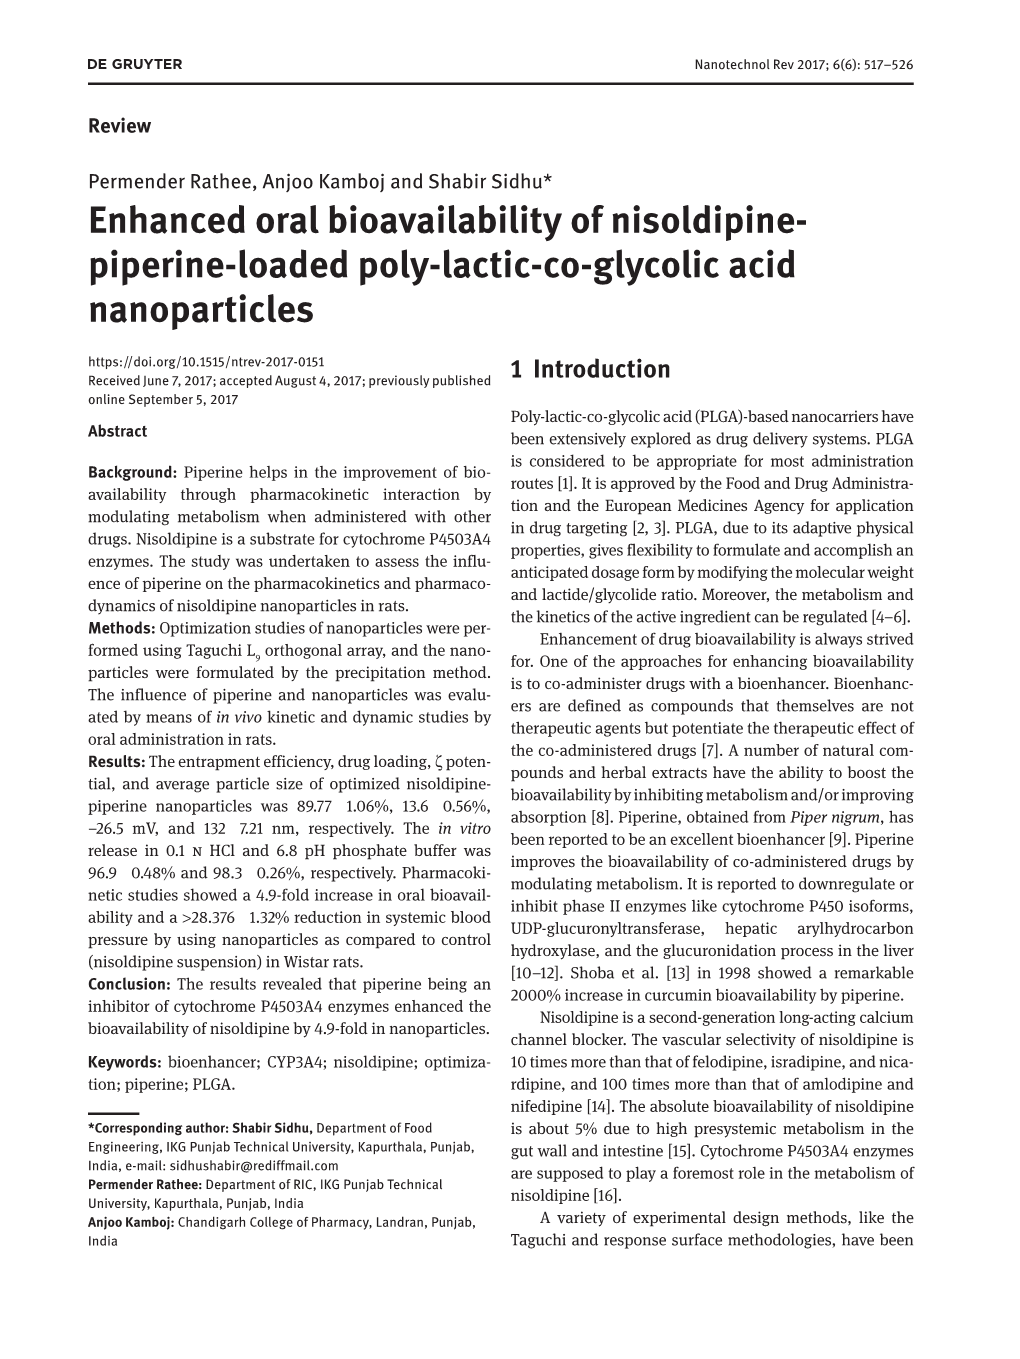 Enhanced Oral Bioavailability of Nisoldipine- Piperine-Loaded Poly